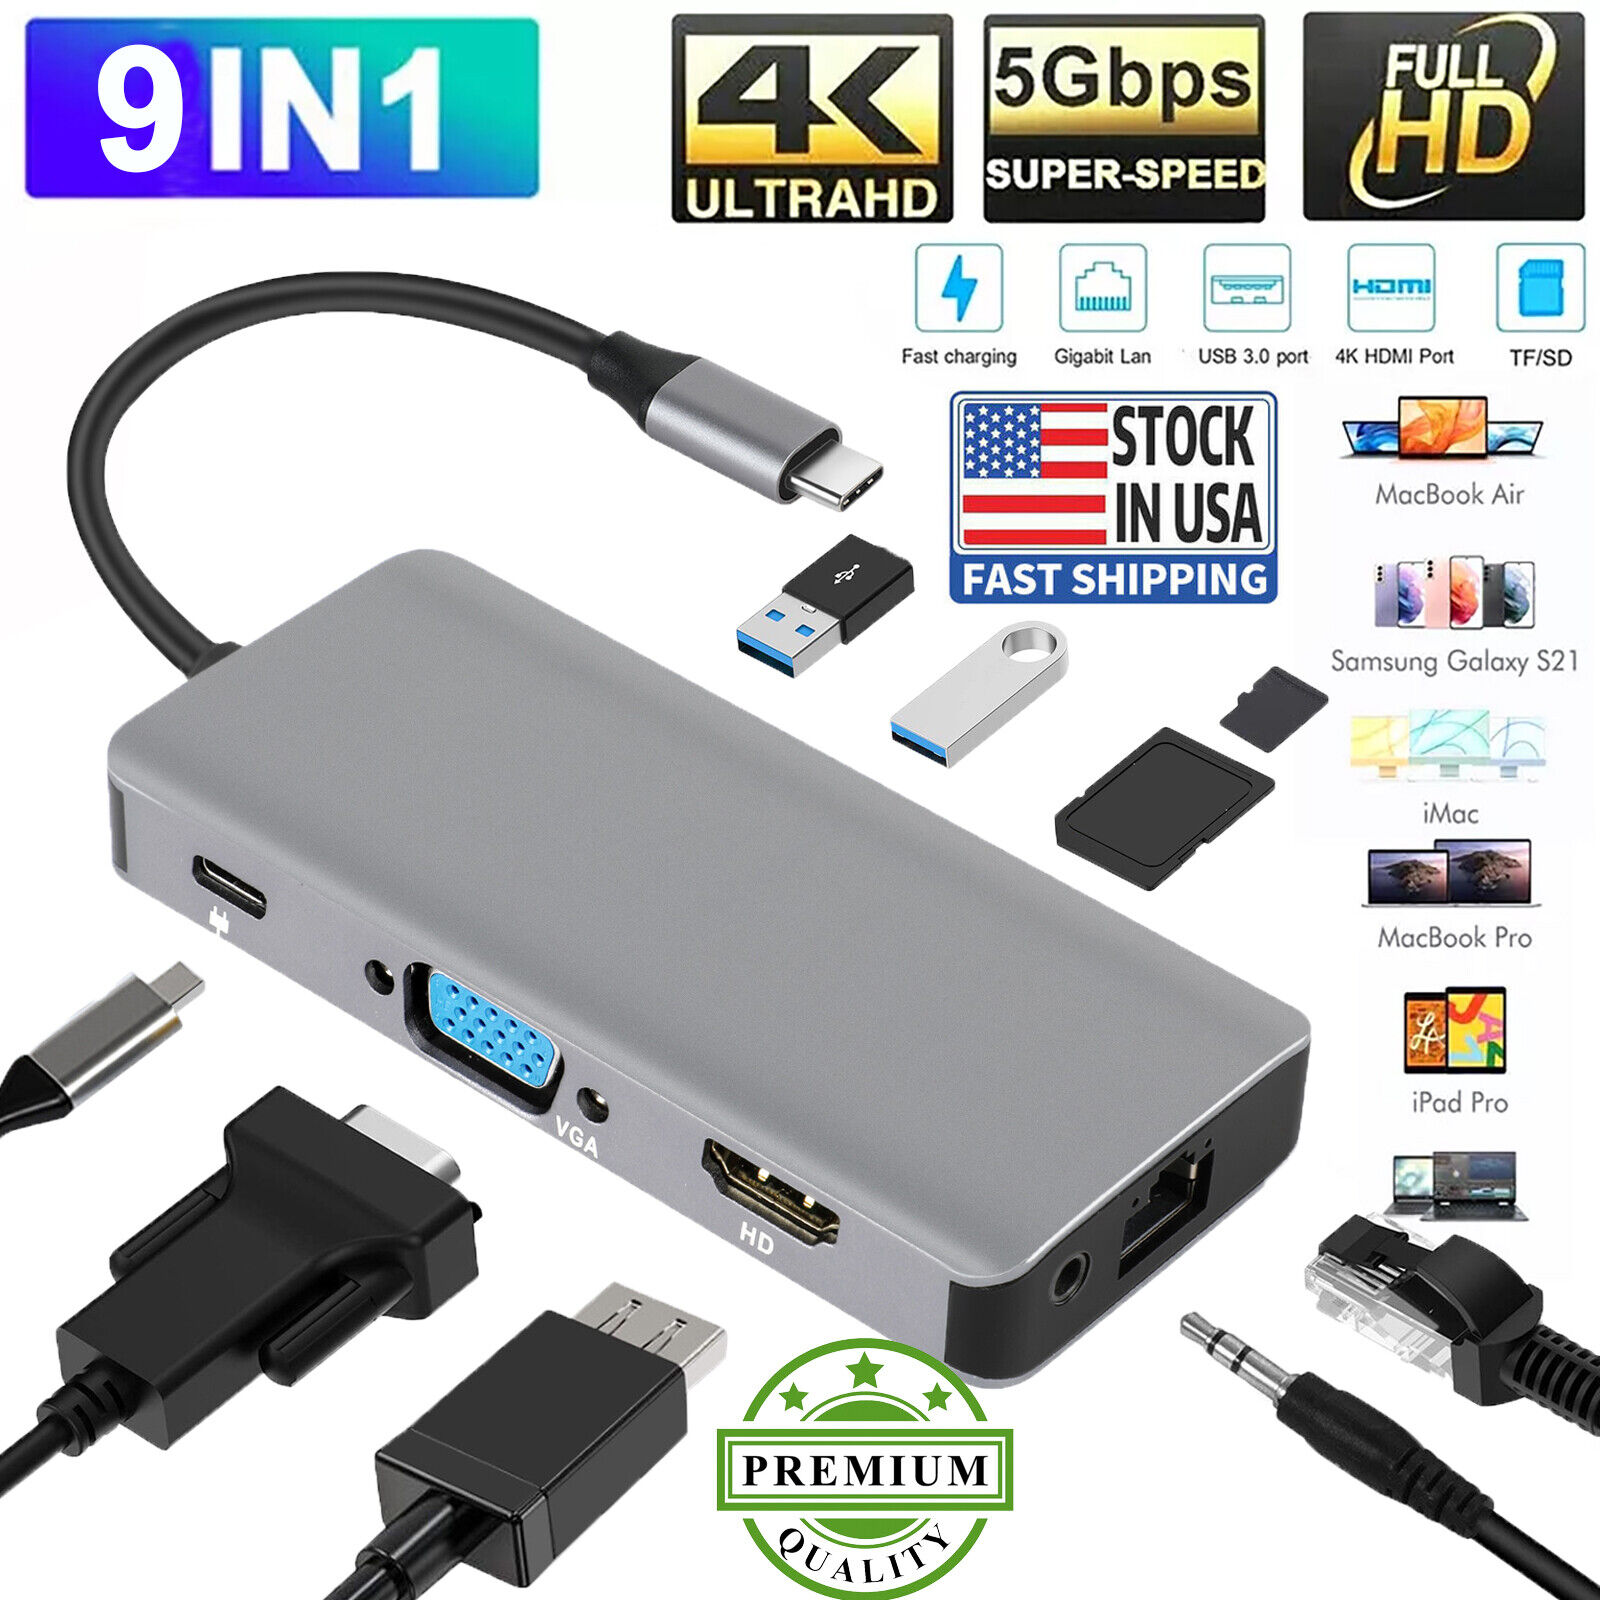 9 in 1 USB-C Hub Type C To USB 3.0 4K HDMI PD Adapter For iPhone Macbook Pro/Air